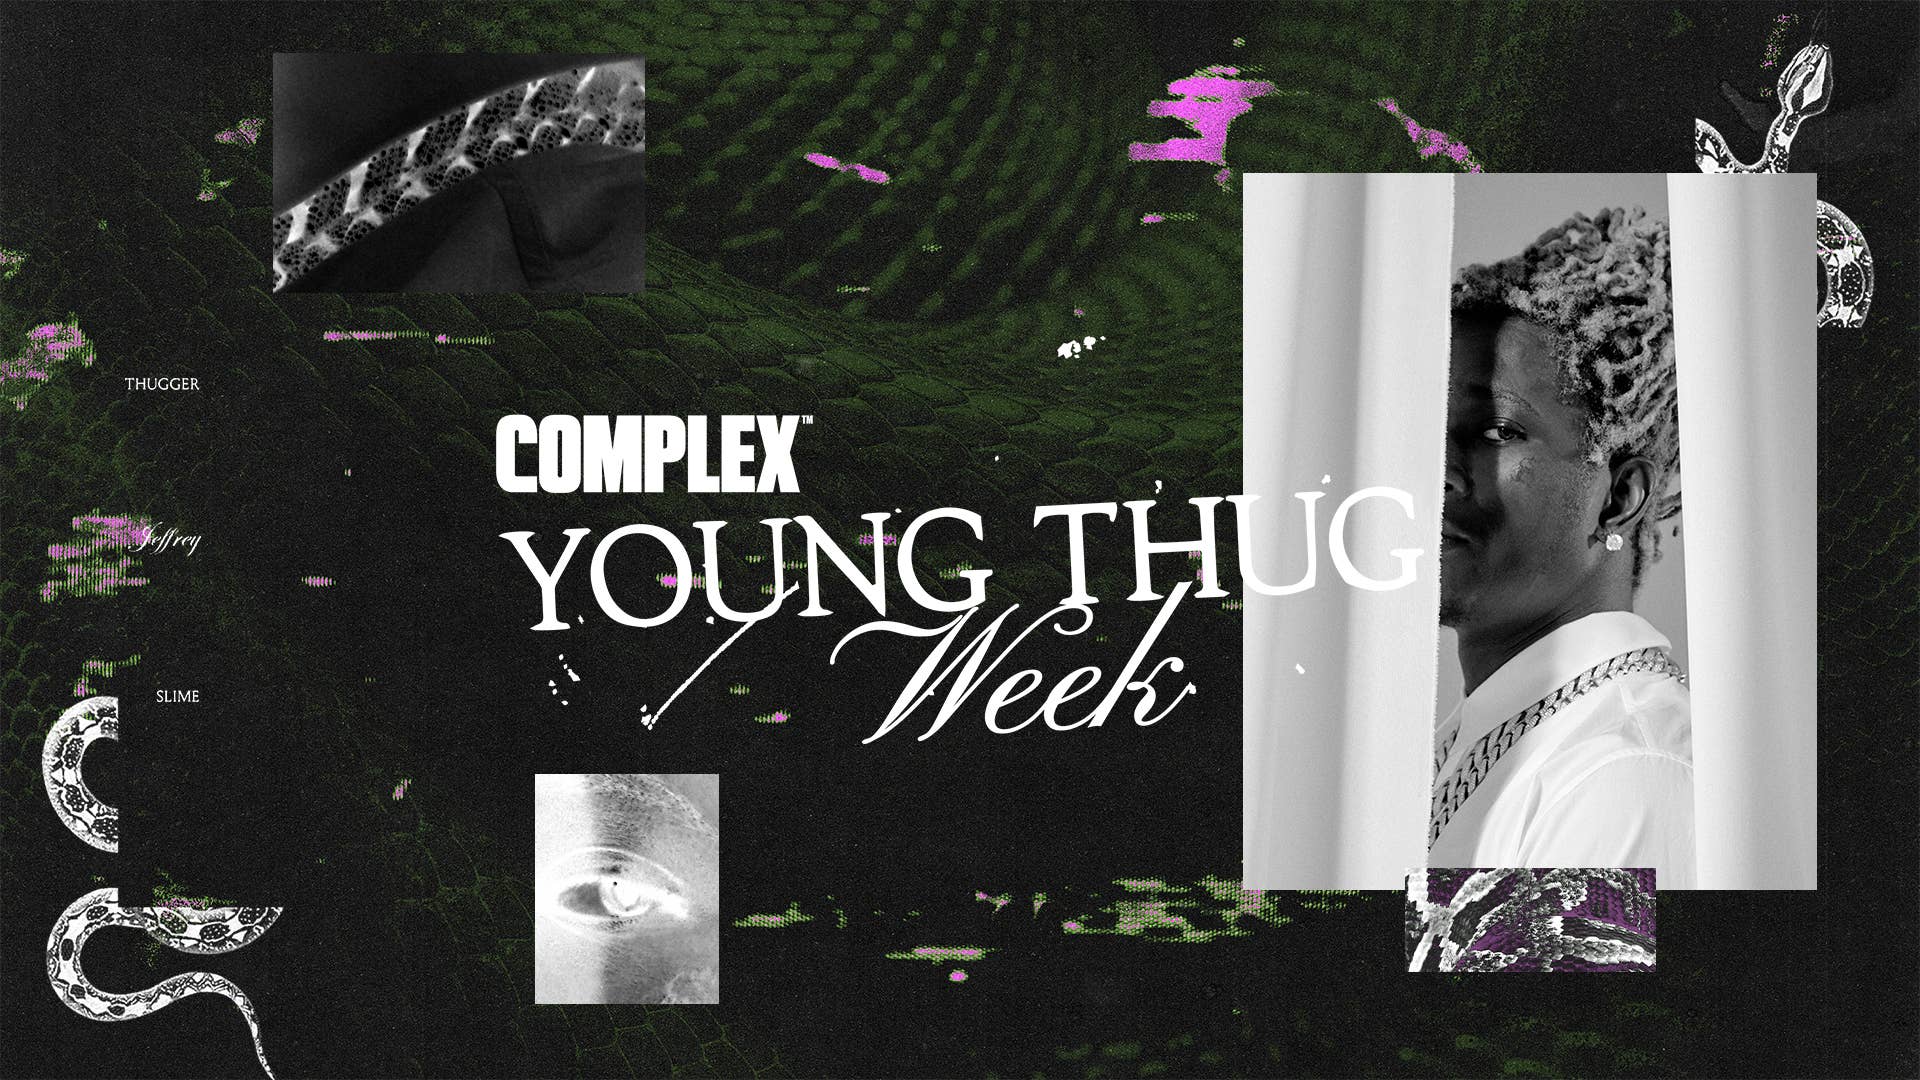 It's Young Thug Week at Complex